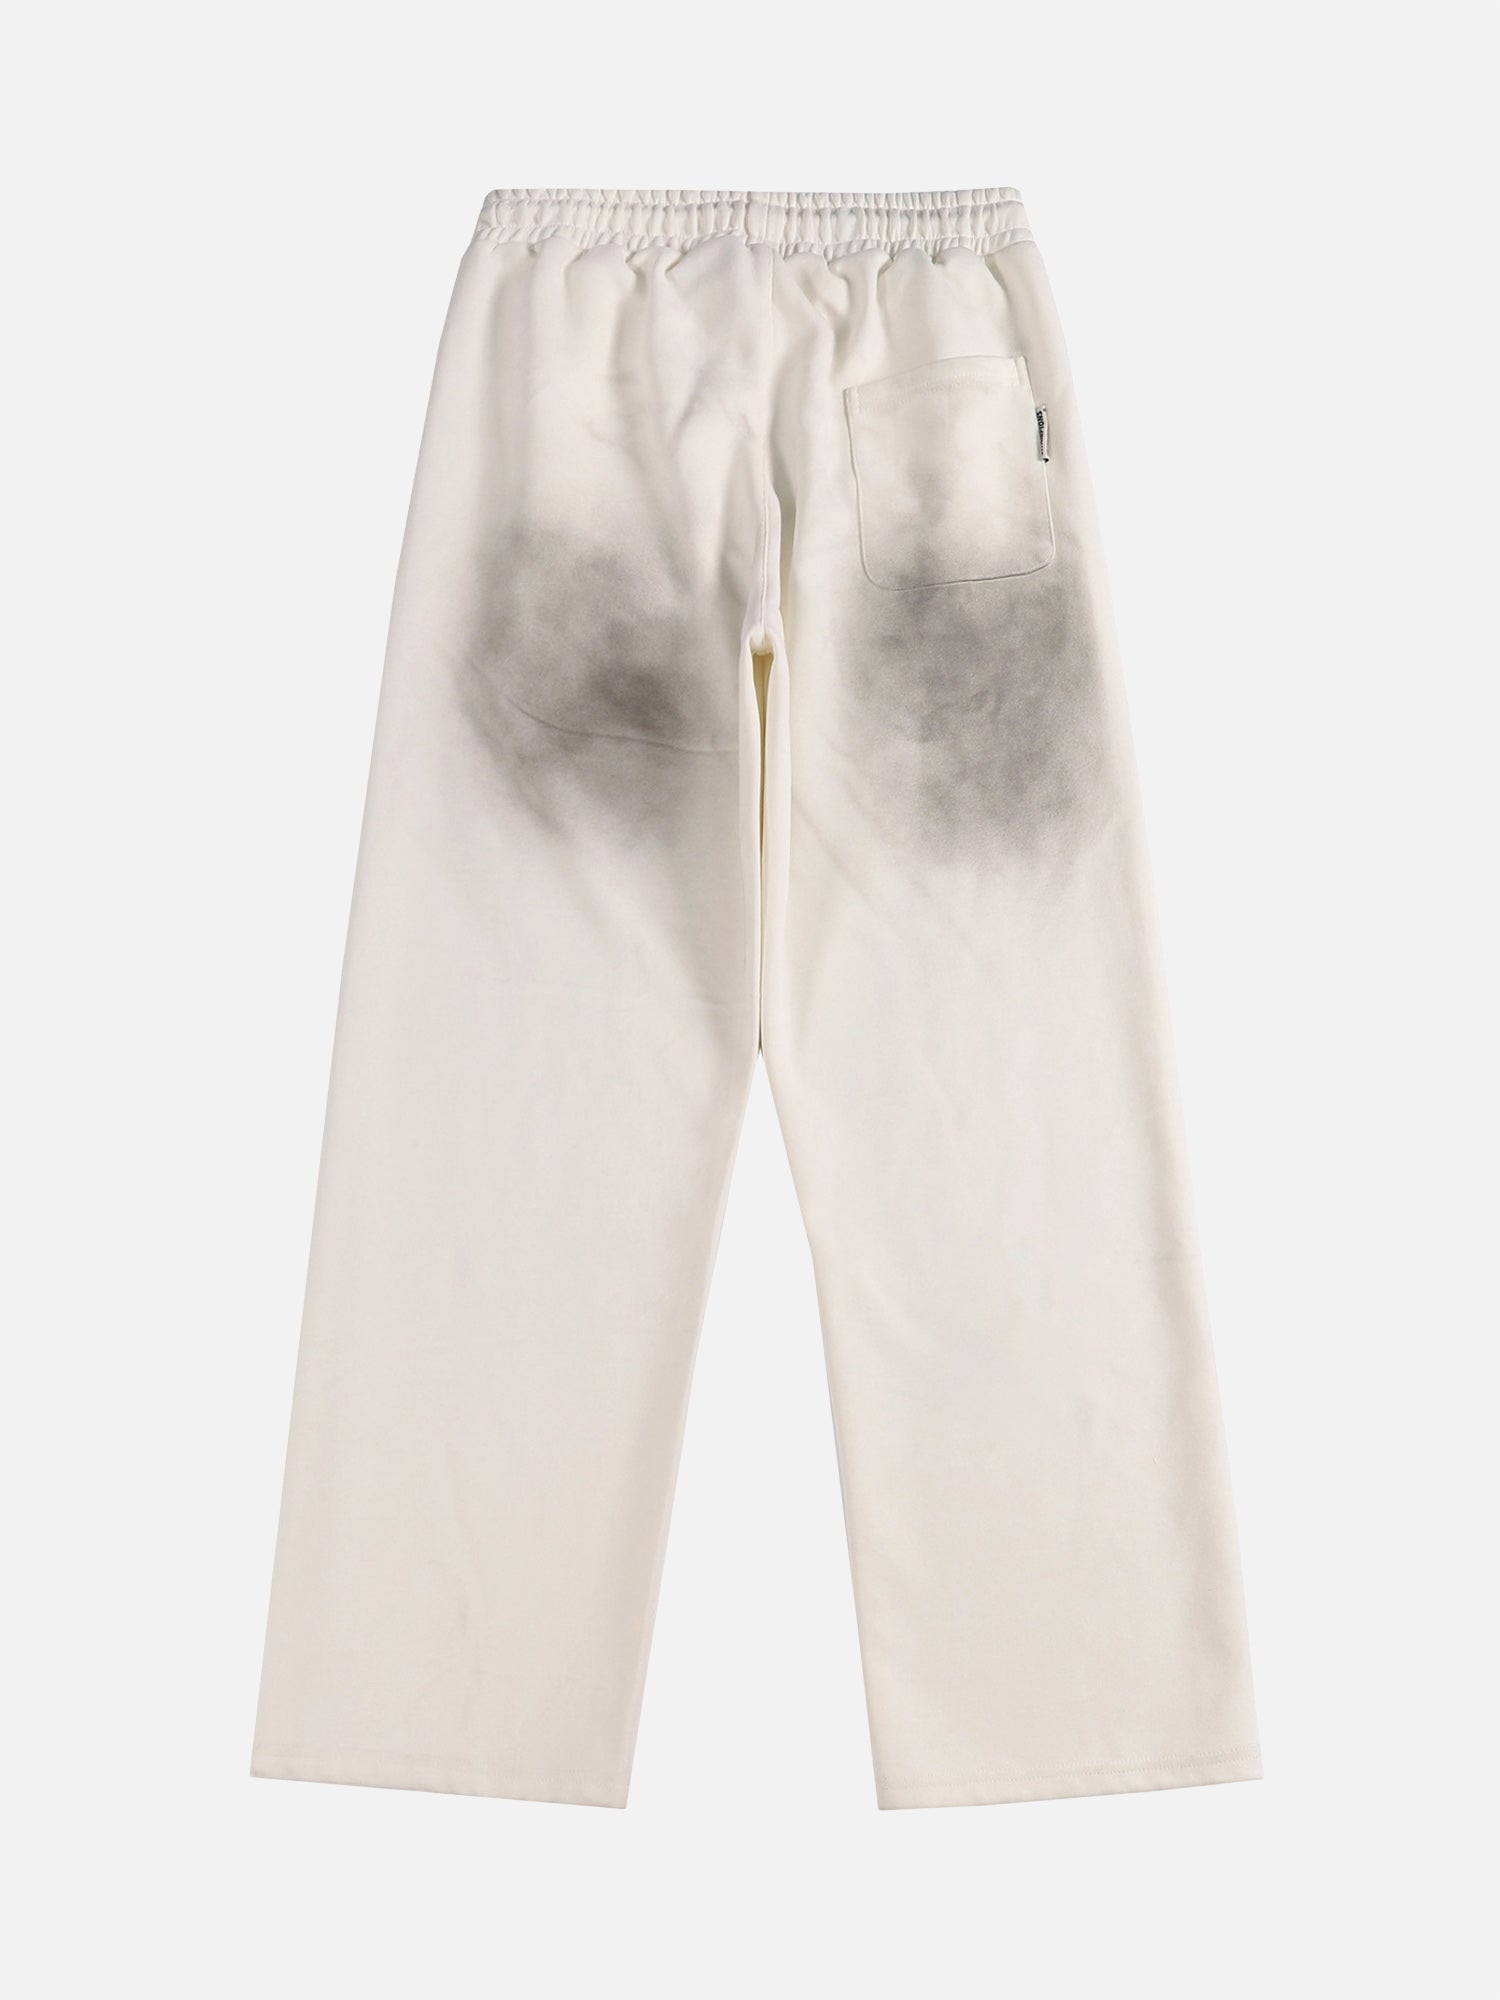 Thesupermade American Style Spray Painted Letters Washed Casual Sweatpants